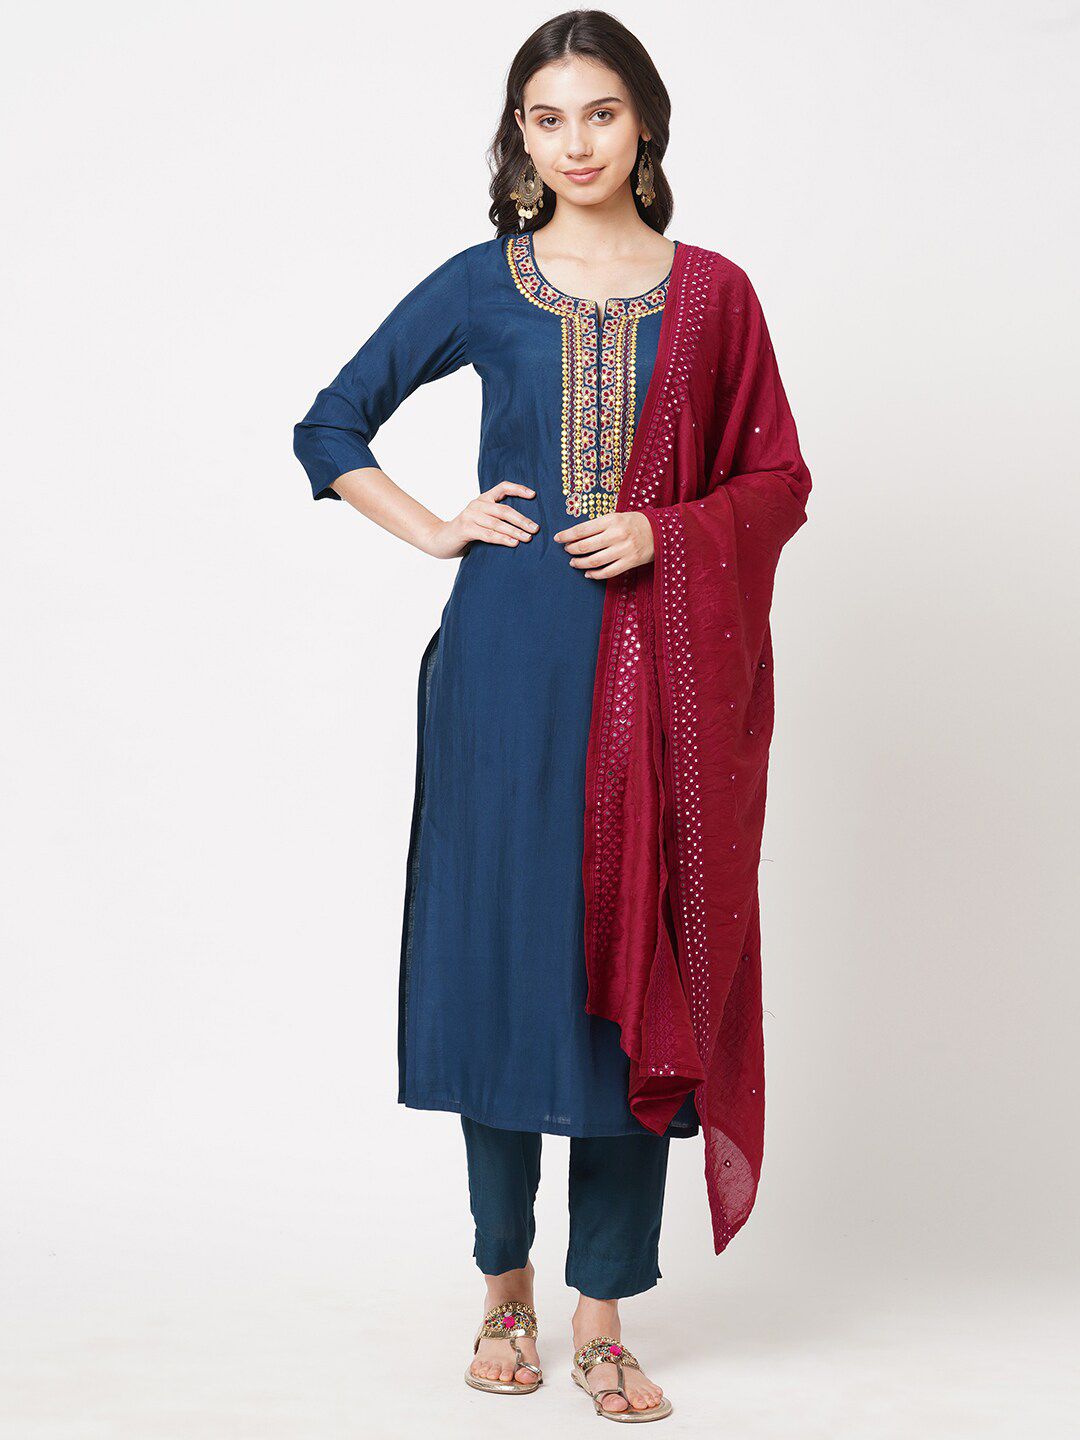 KAMI KUBI Blue & Maroon Embroidered Art Silk Unstitched Dress Material Price in India